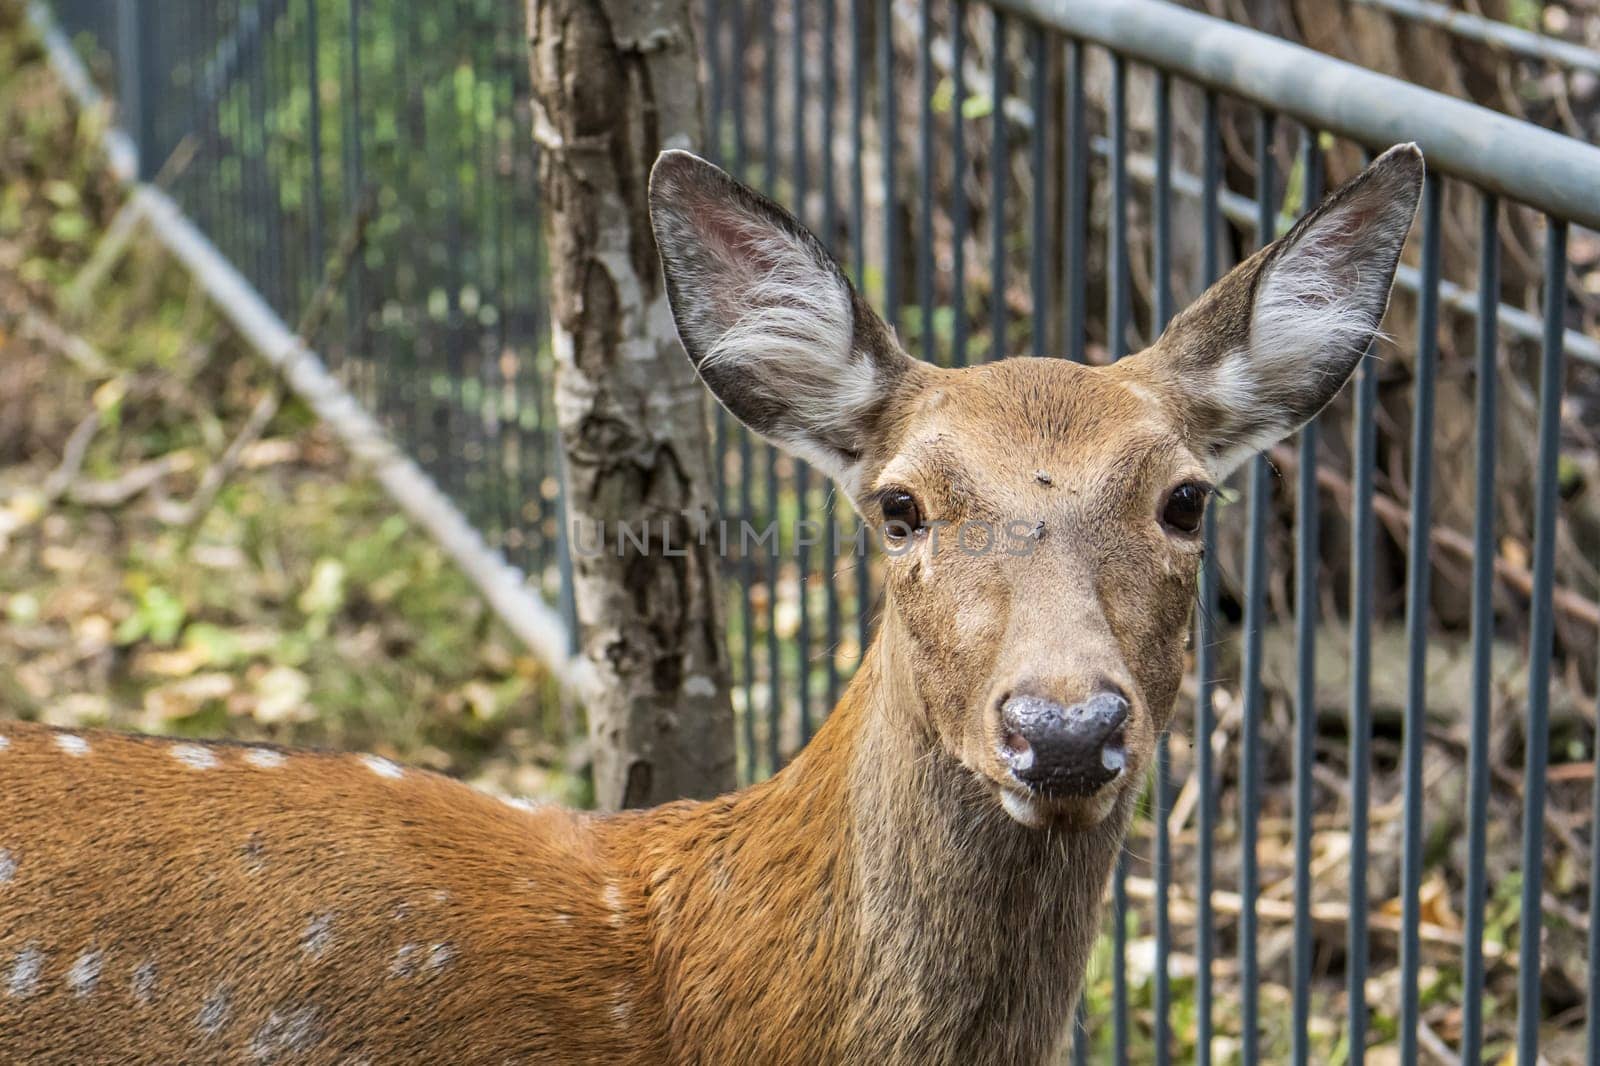 Close up of a deer in a zoo